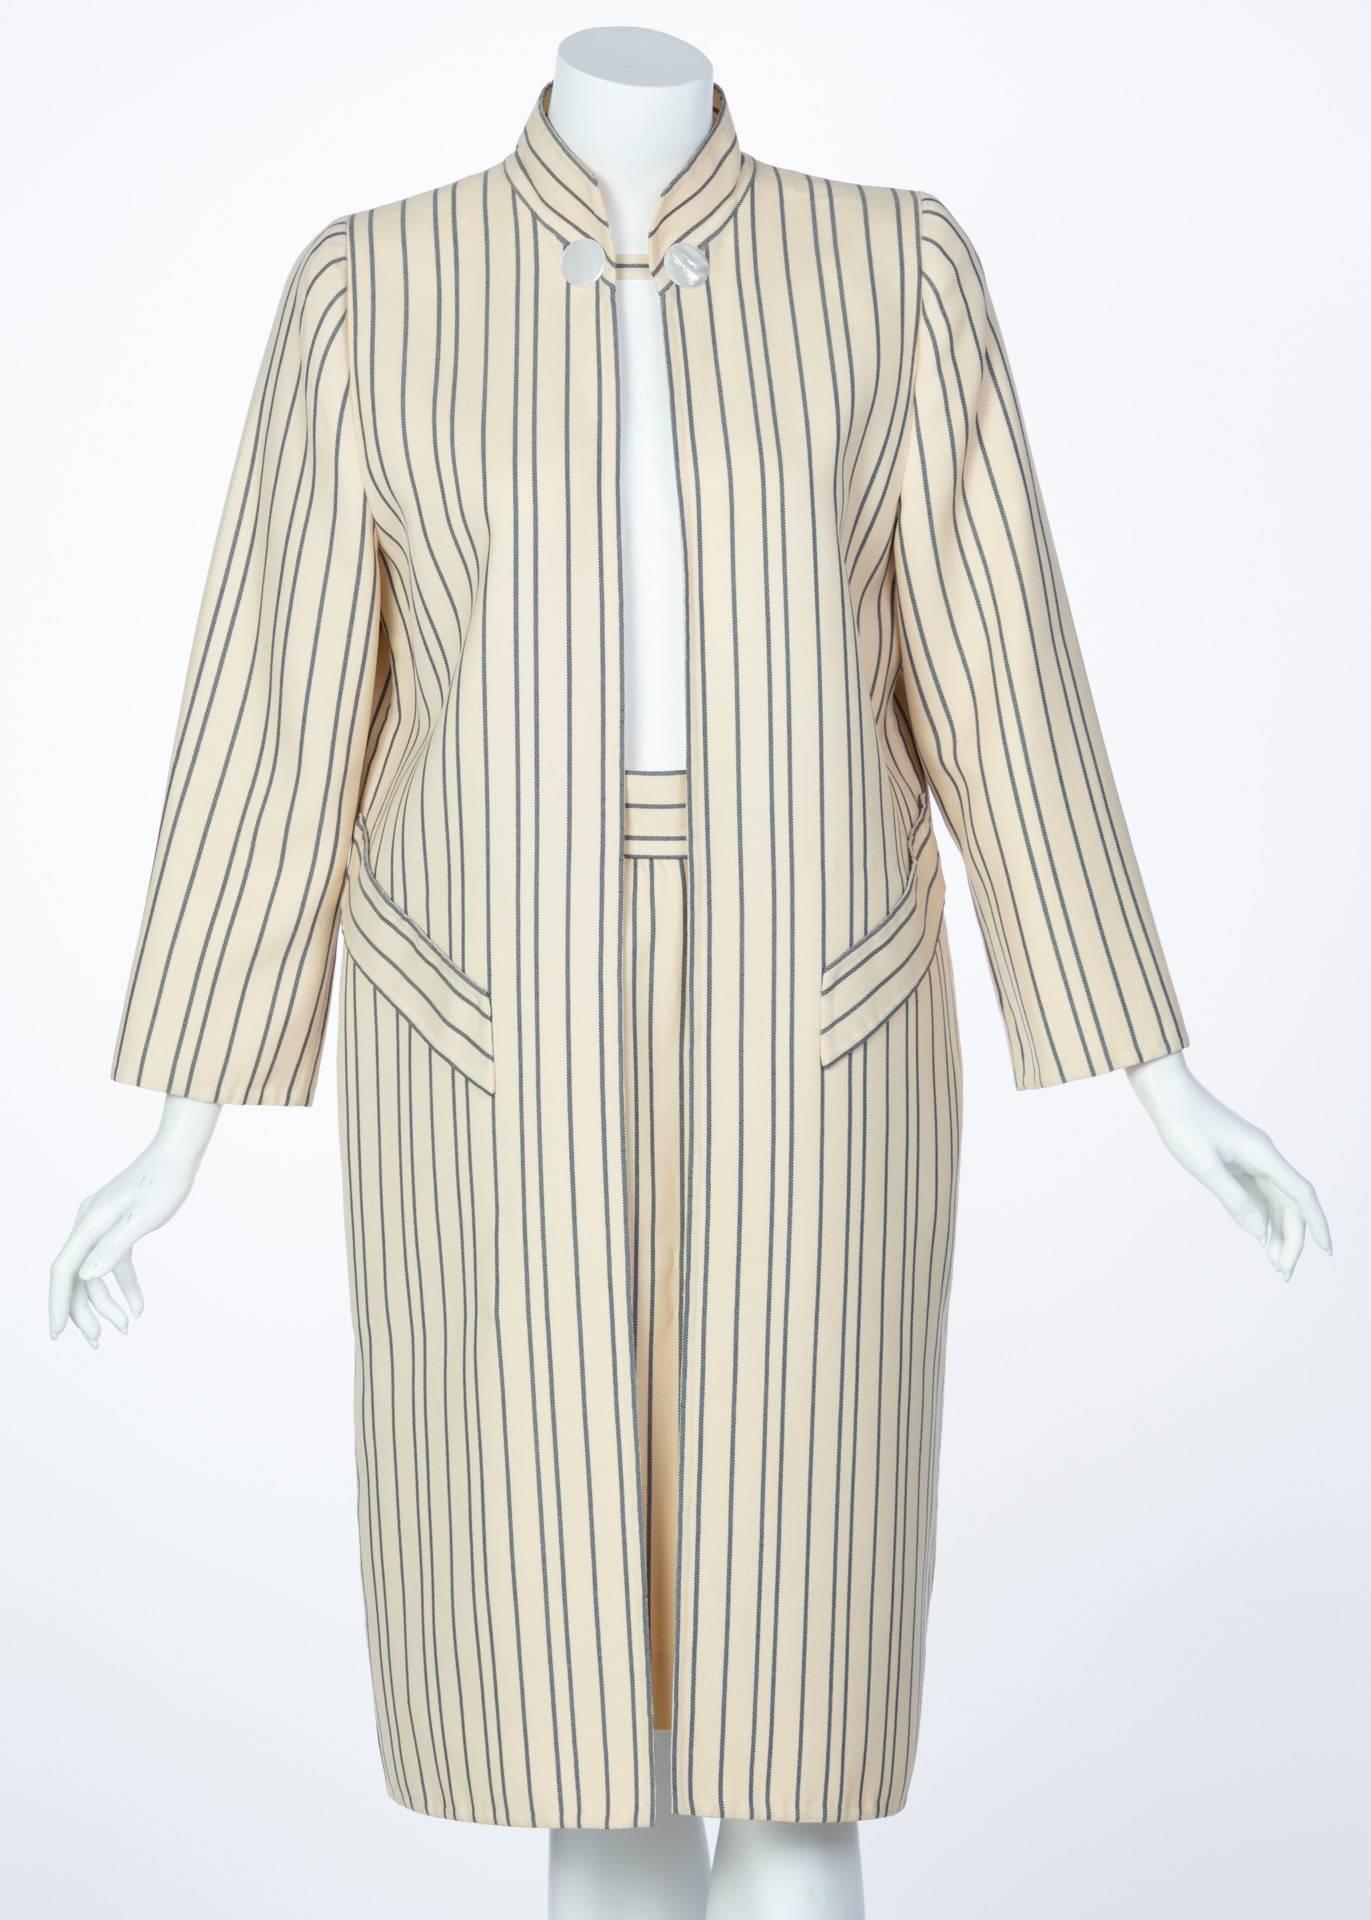 Mme. Pauline Trigère was a French born, American designer who is acclaimed by her effective use of line, and minimalist aesthetic. Raising to popularity in the 1950s, Trigère favored a clean, tailored look, preferring to allow the fabric to speak